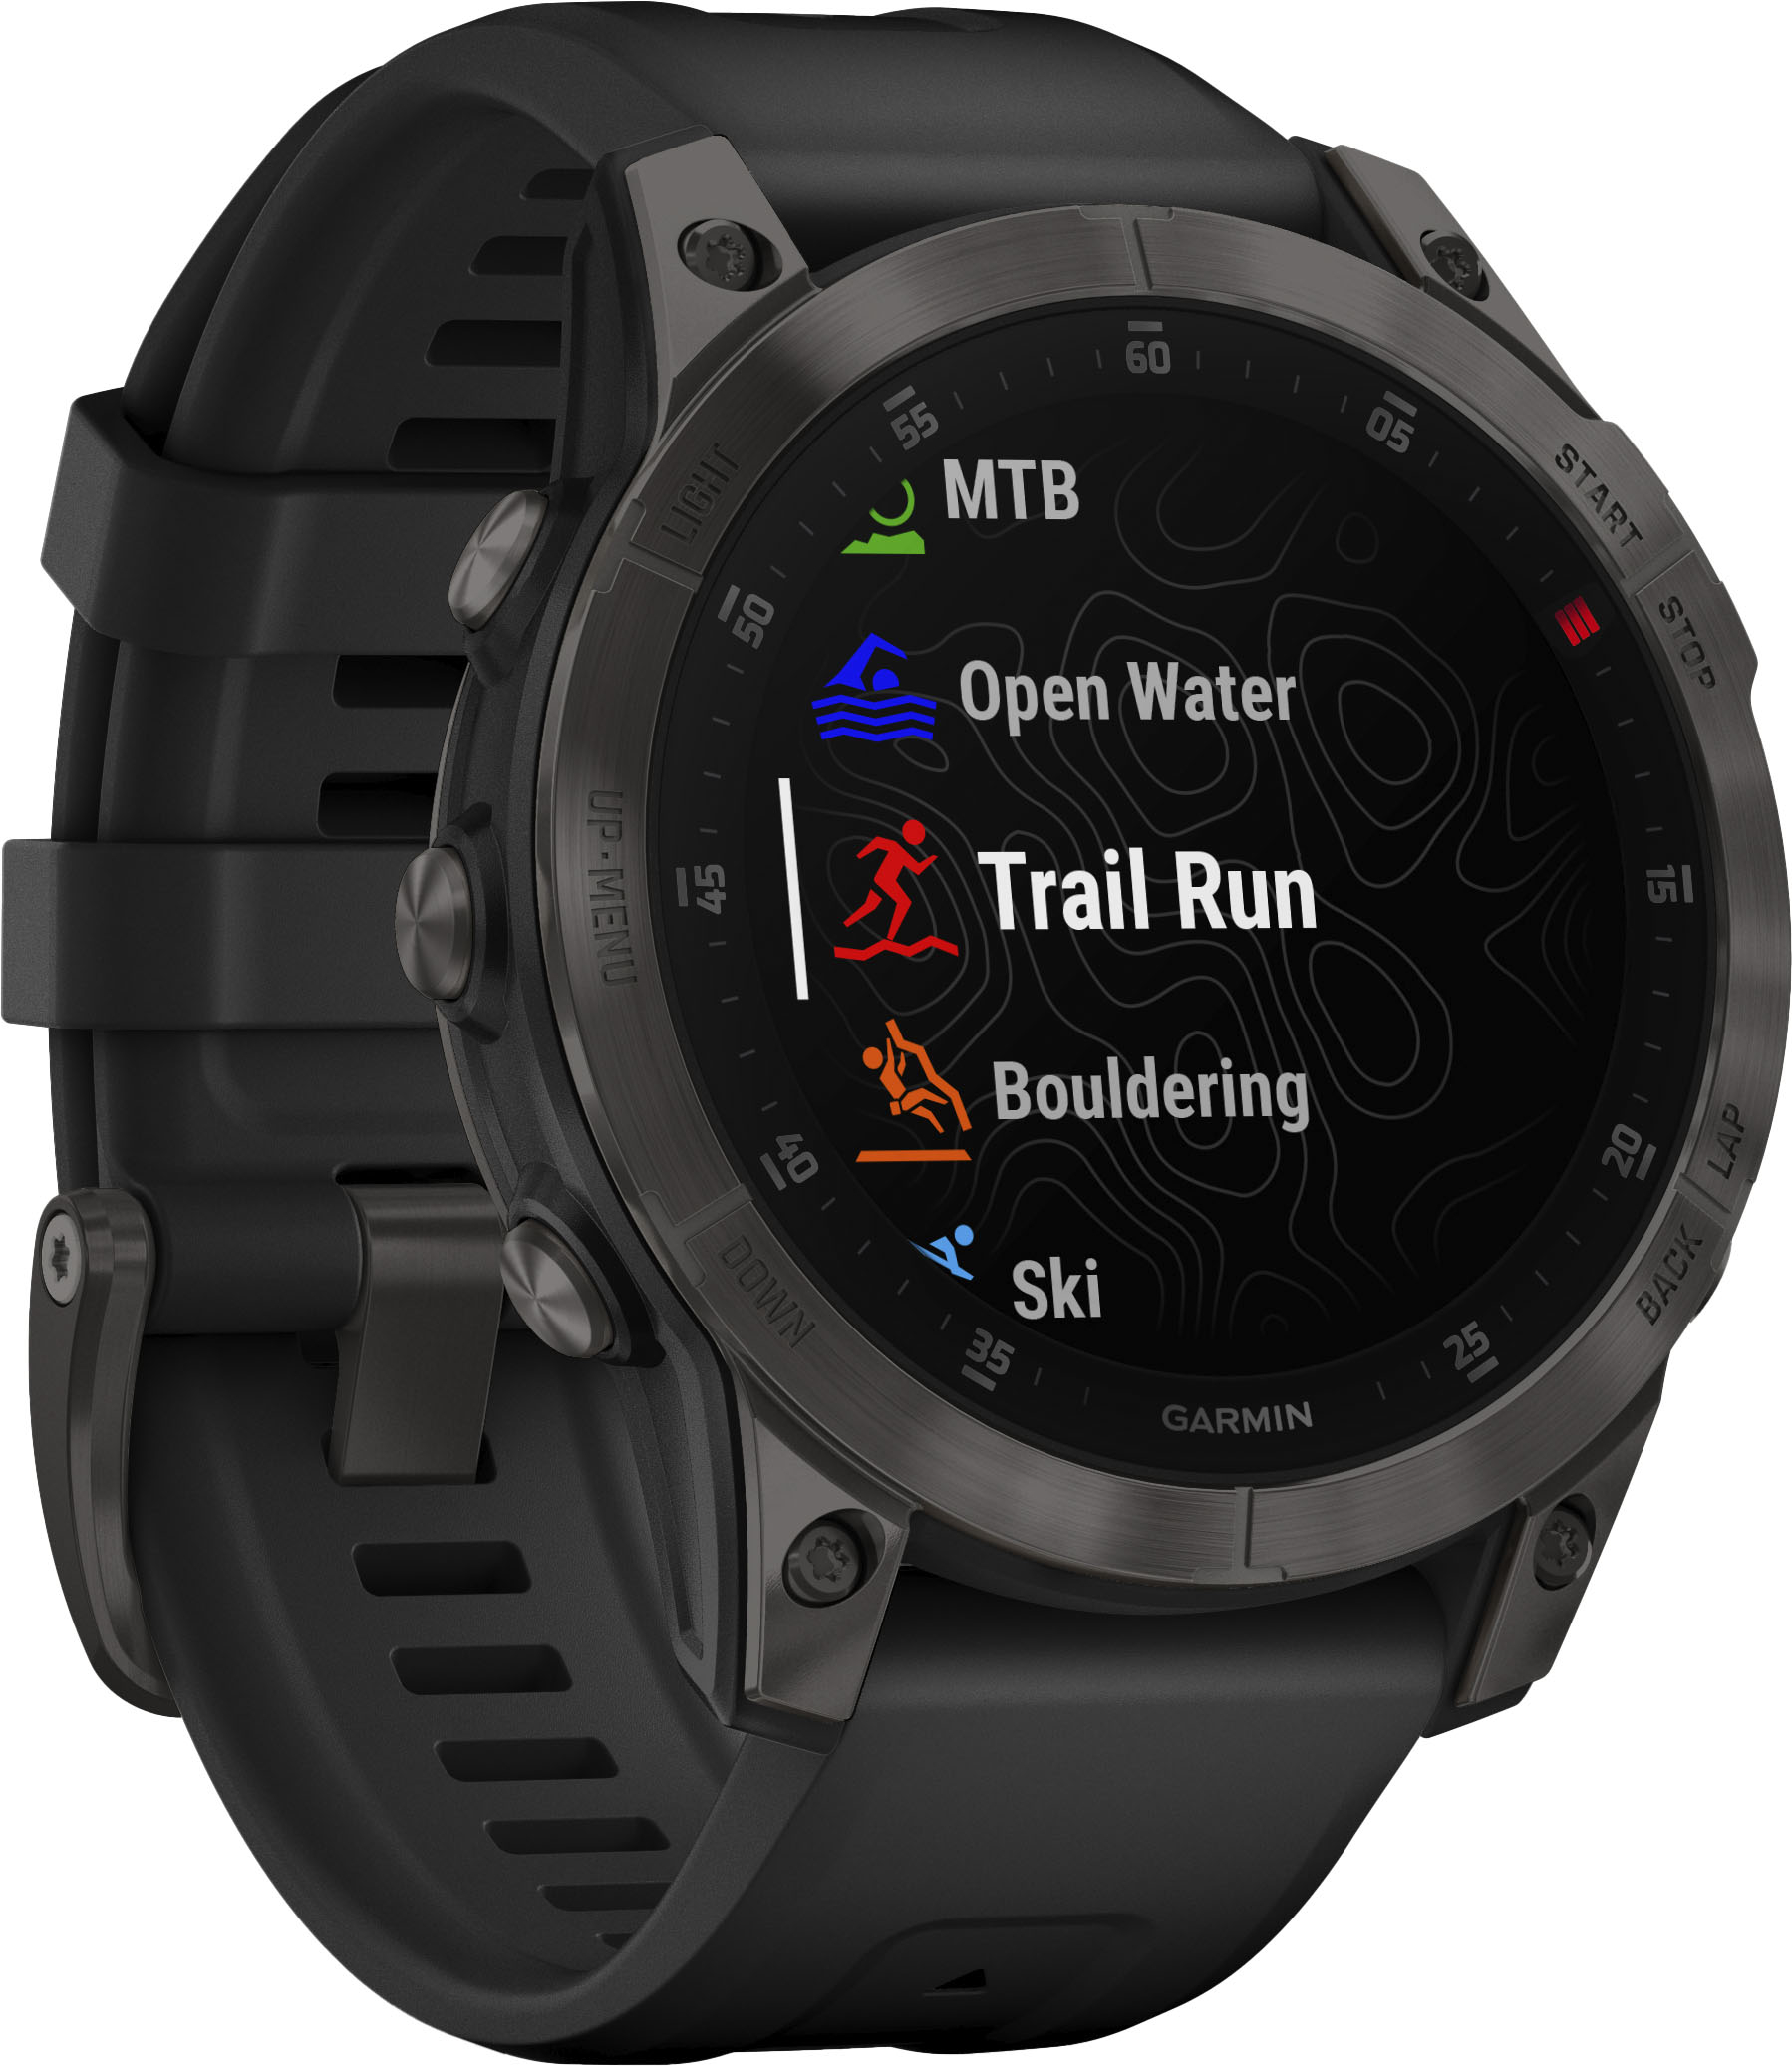 Garmin Epix 2 smartwatch review - superb functionality, brilliant display,  changed my life